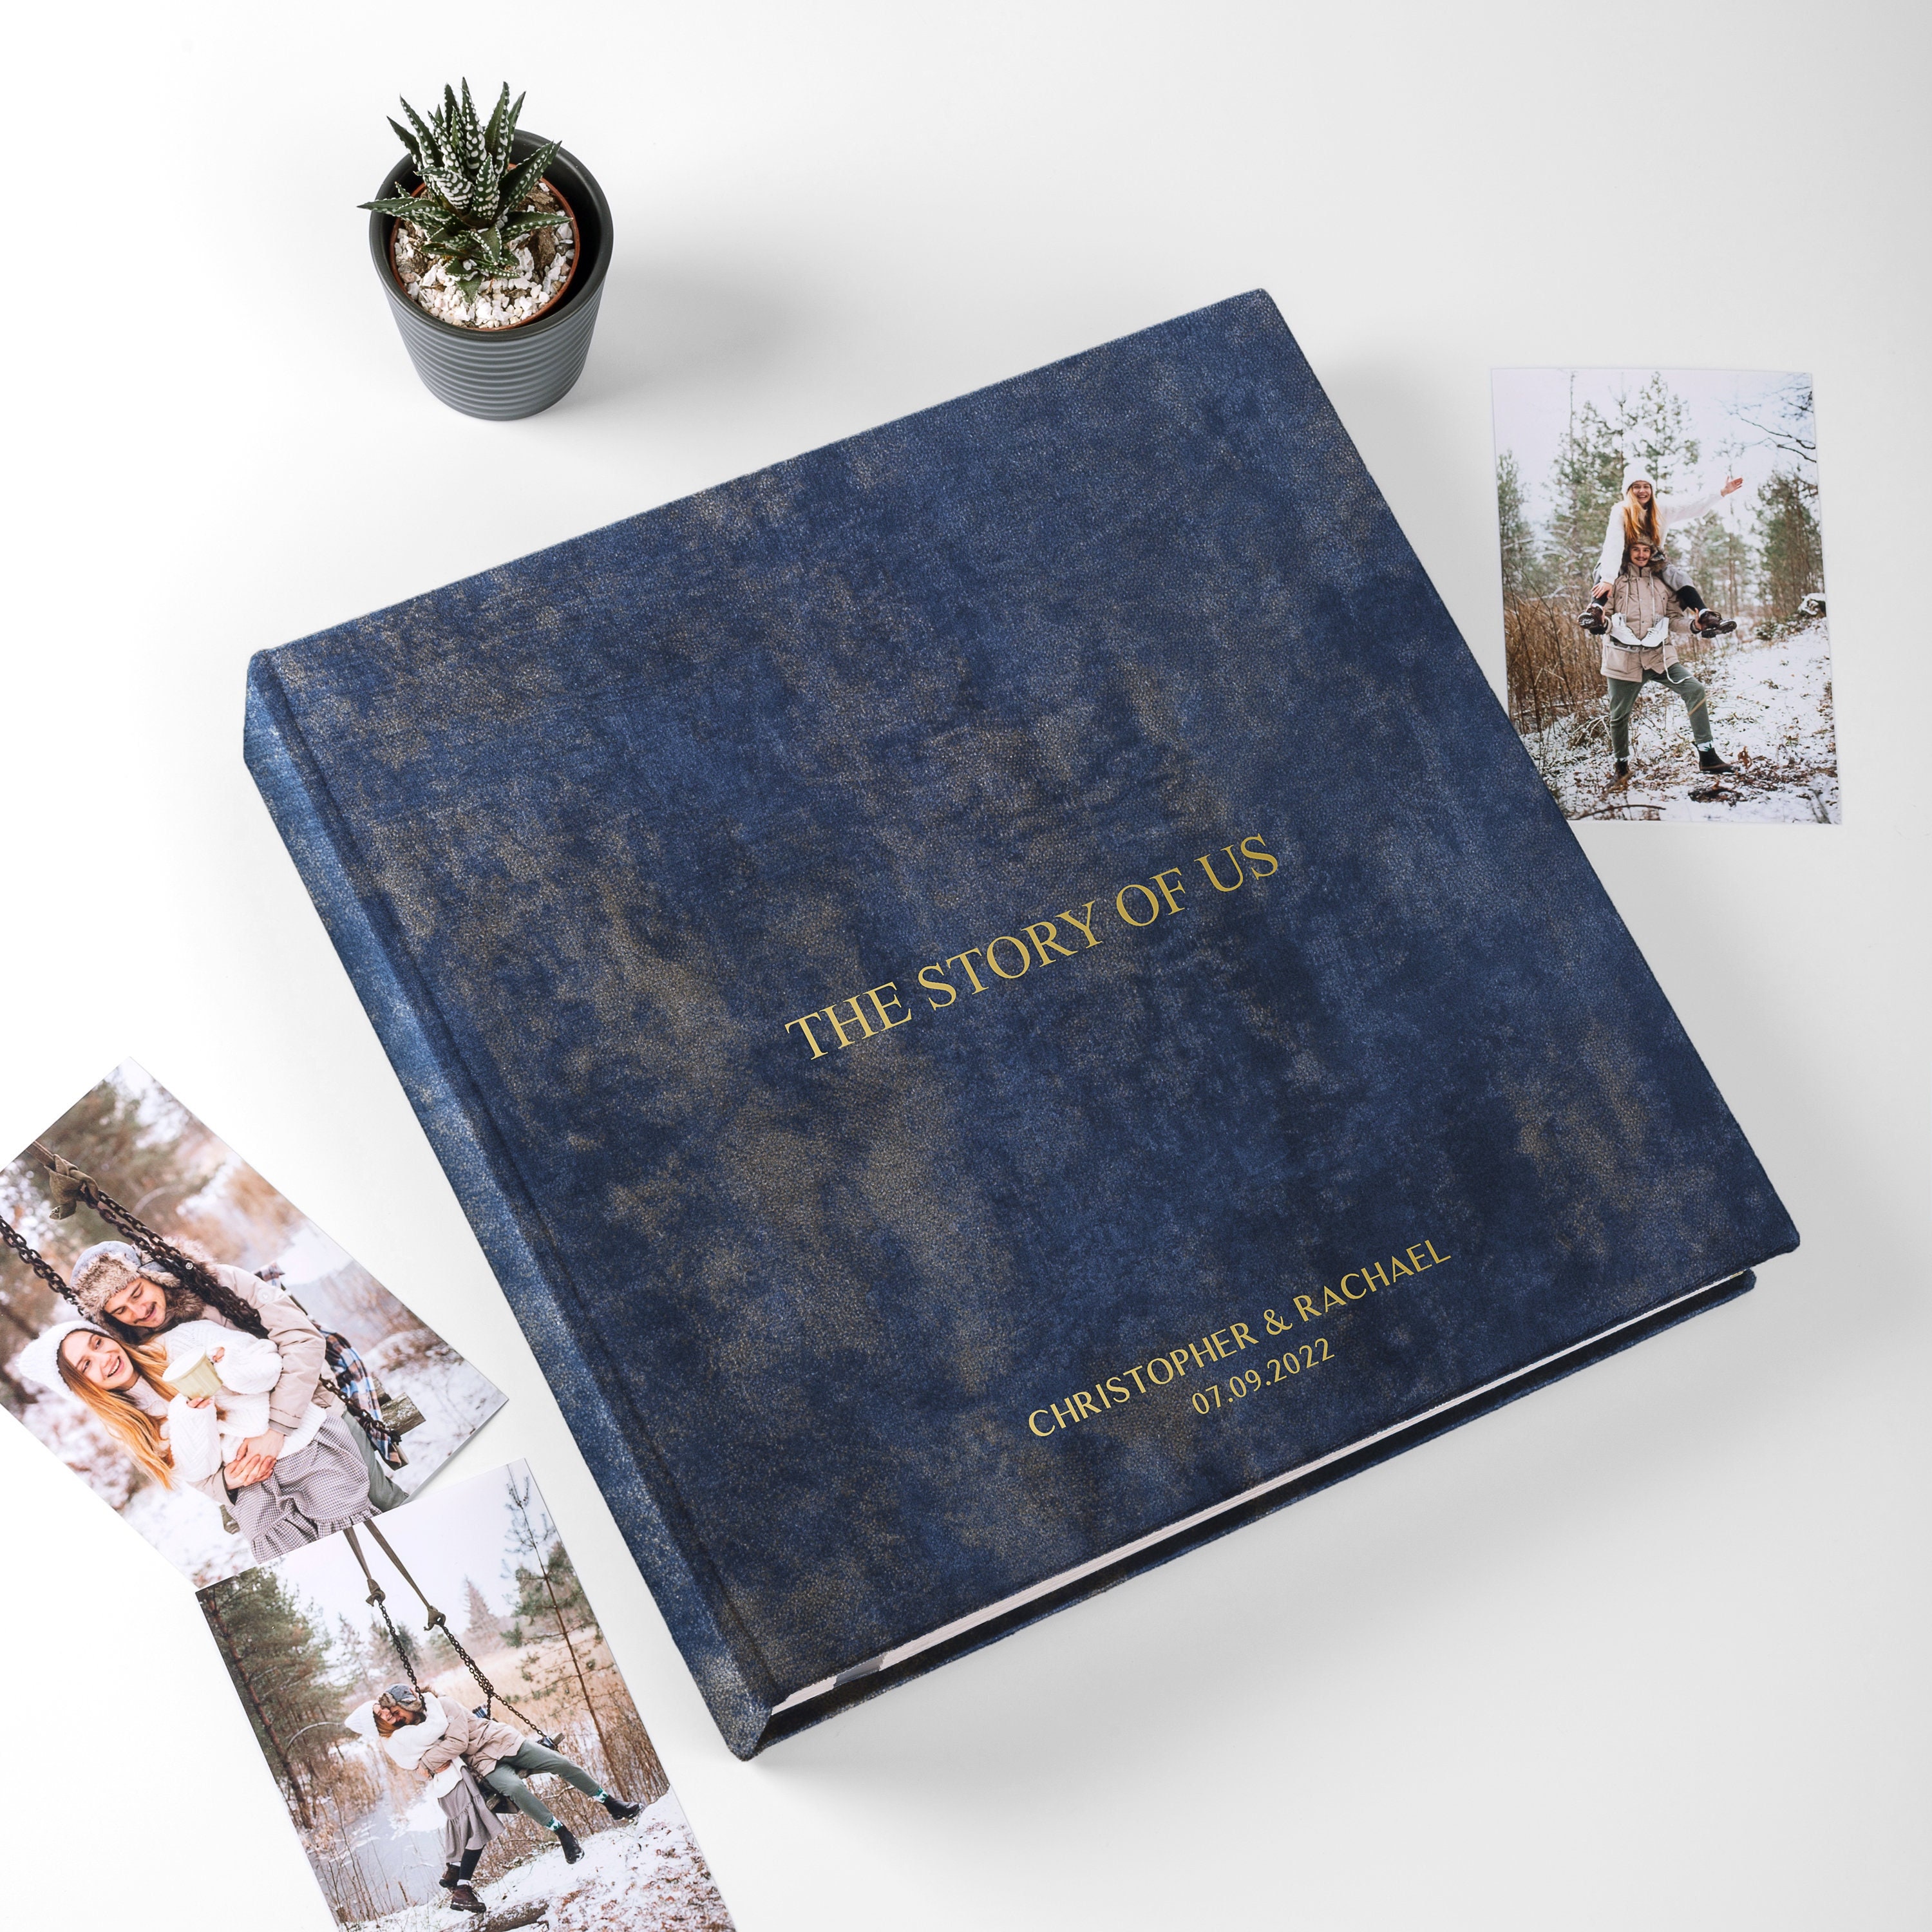 Photo Album With Sleeves for 4x6 Photos, Large Navy Blue Velvet Slip in  Photo Album for up to 1000 Photos 